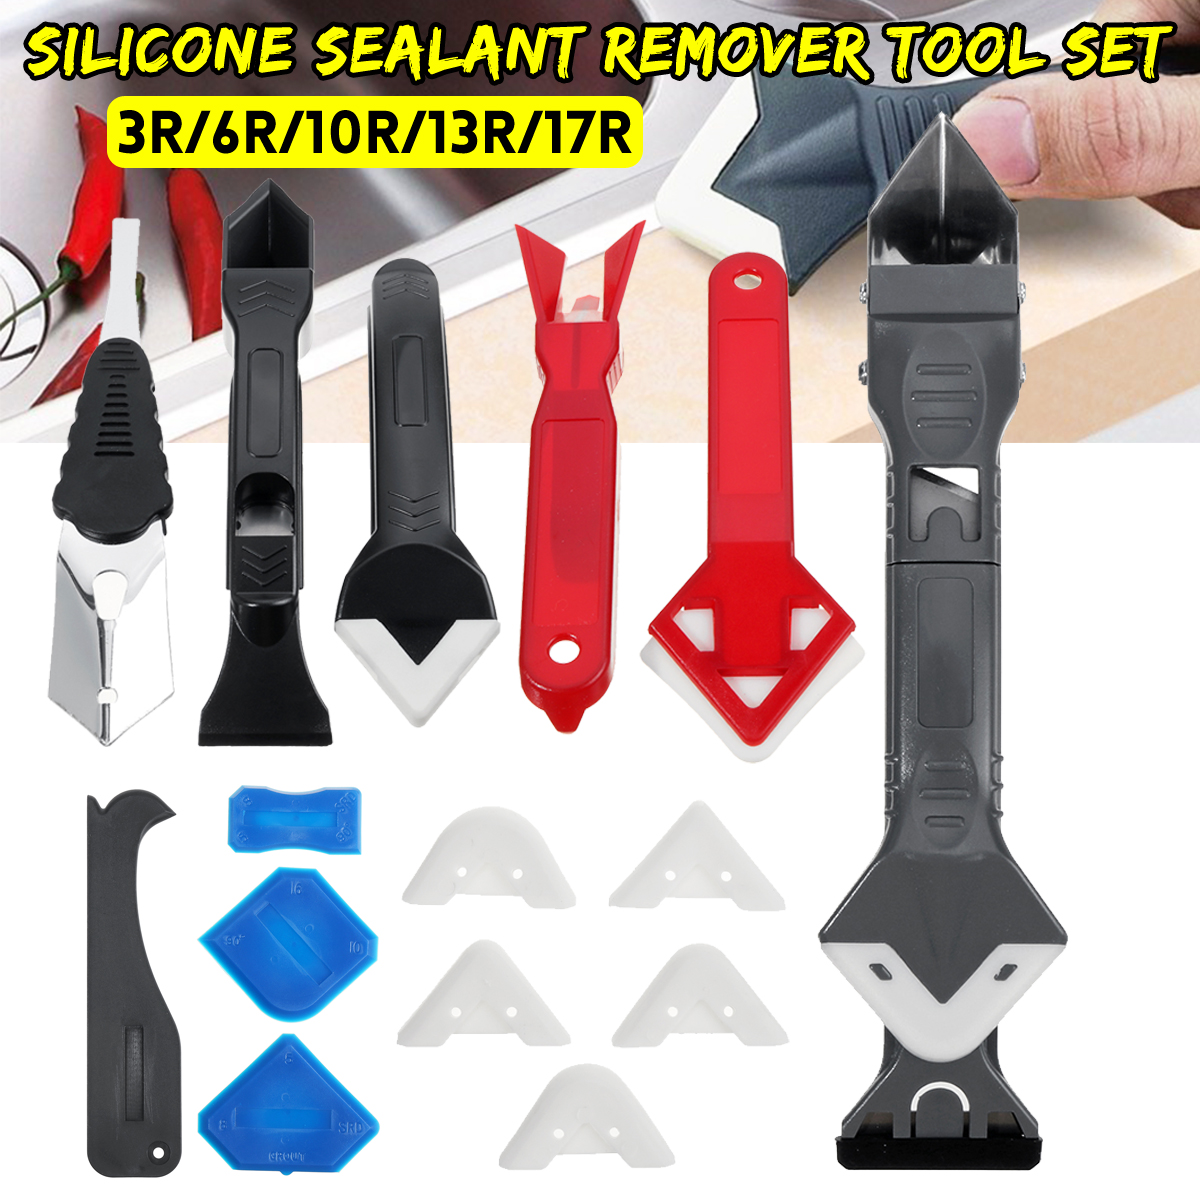 Silicone-Sealant-Remover-Tool-Kit-Set-Useful-Door-Window-Cleaning-Tools-Scraper-Caulking-Removal-For-1779827-1